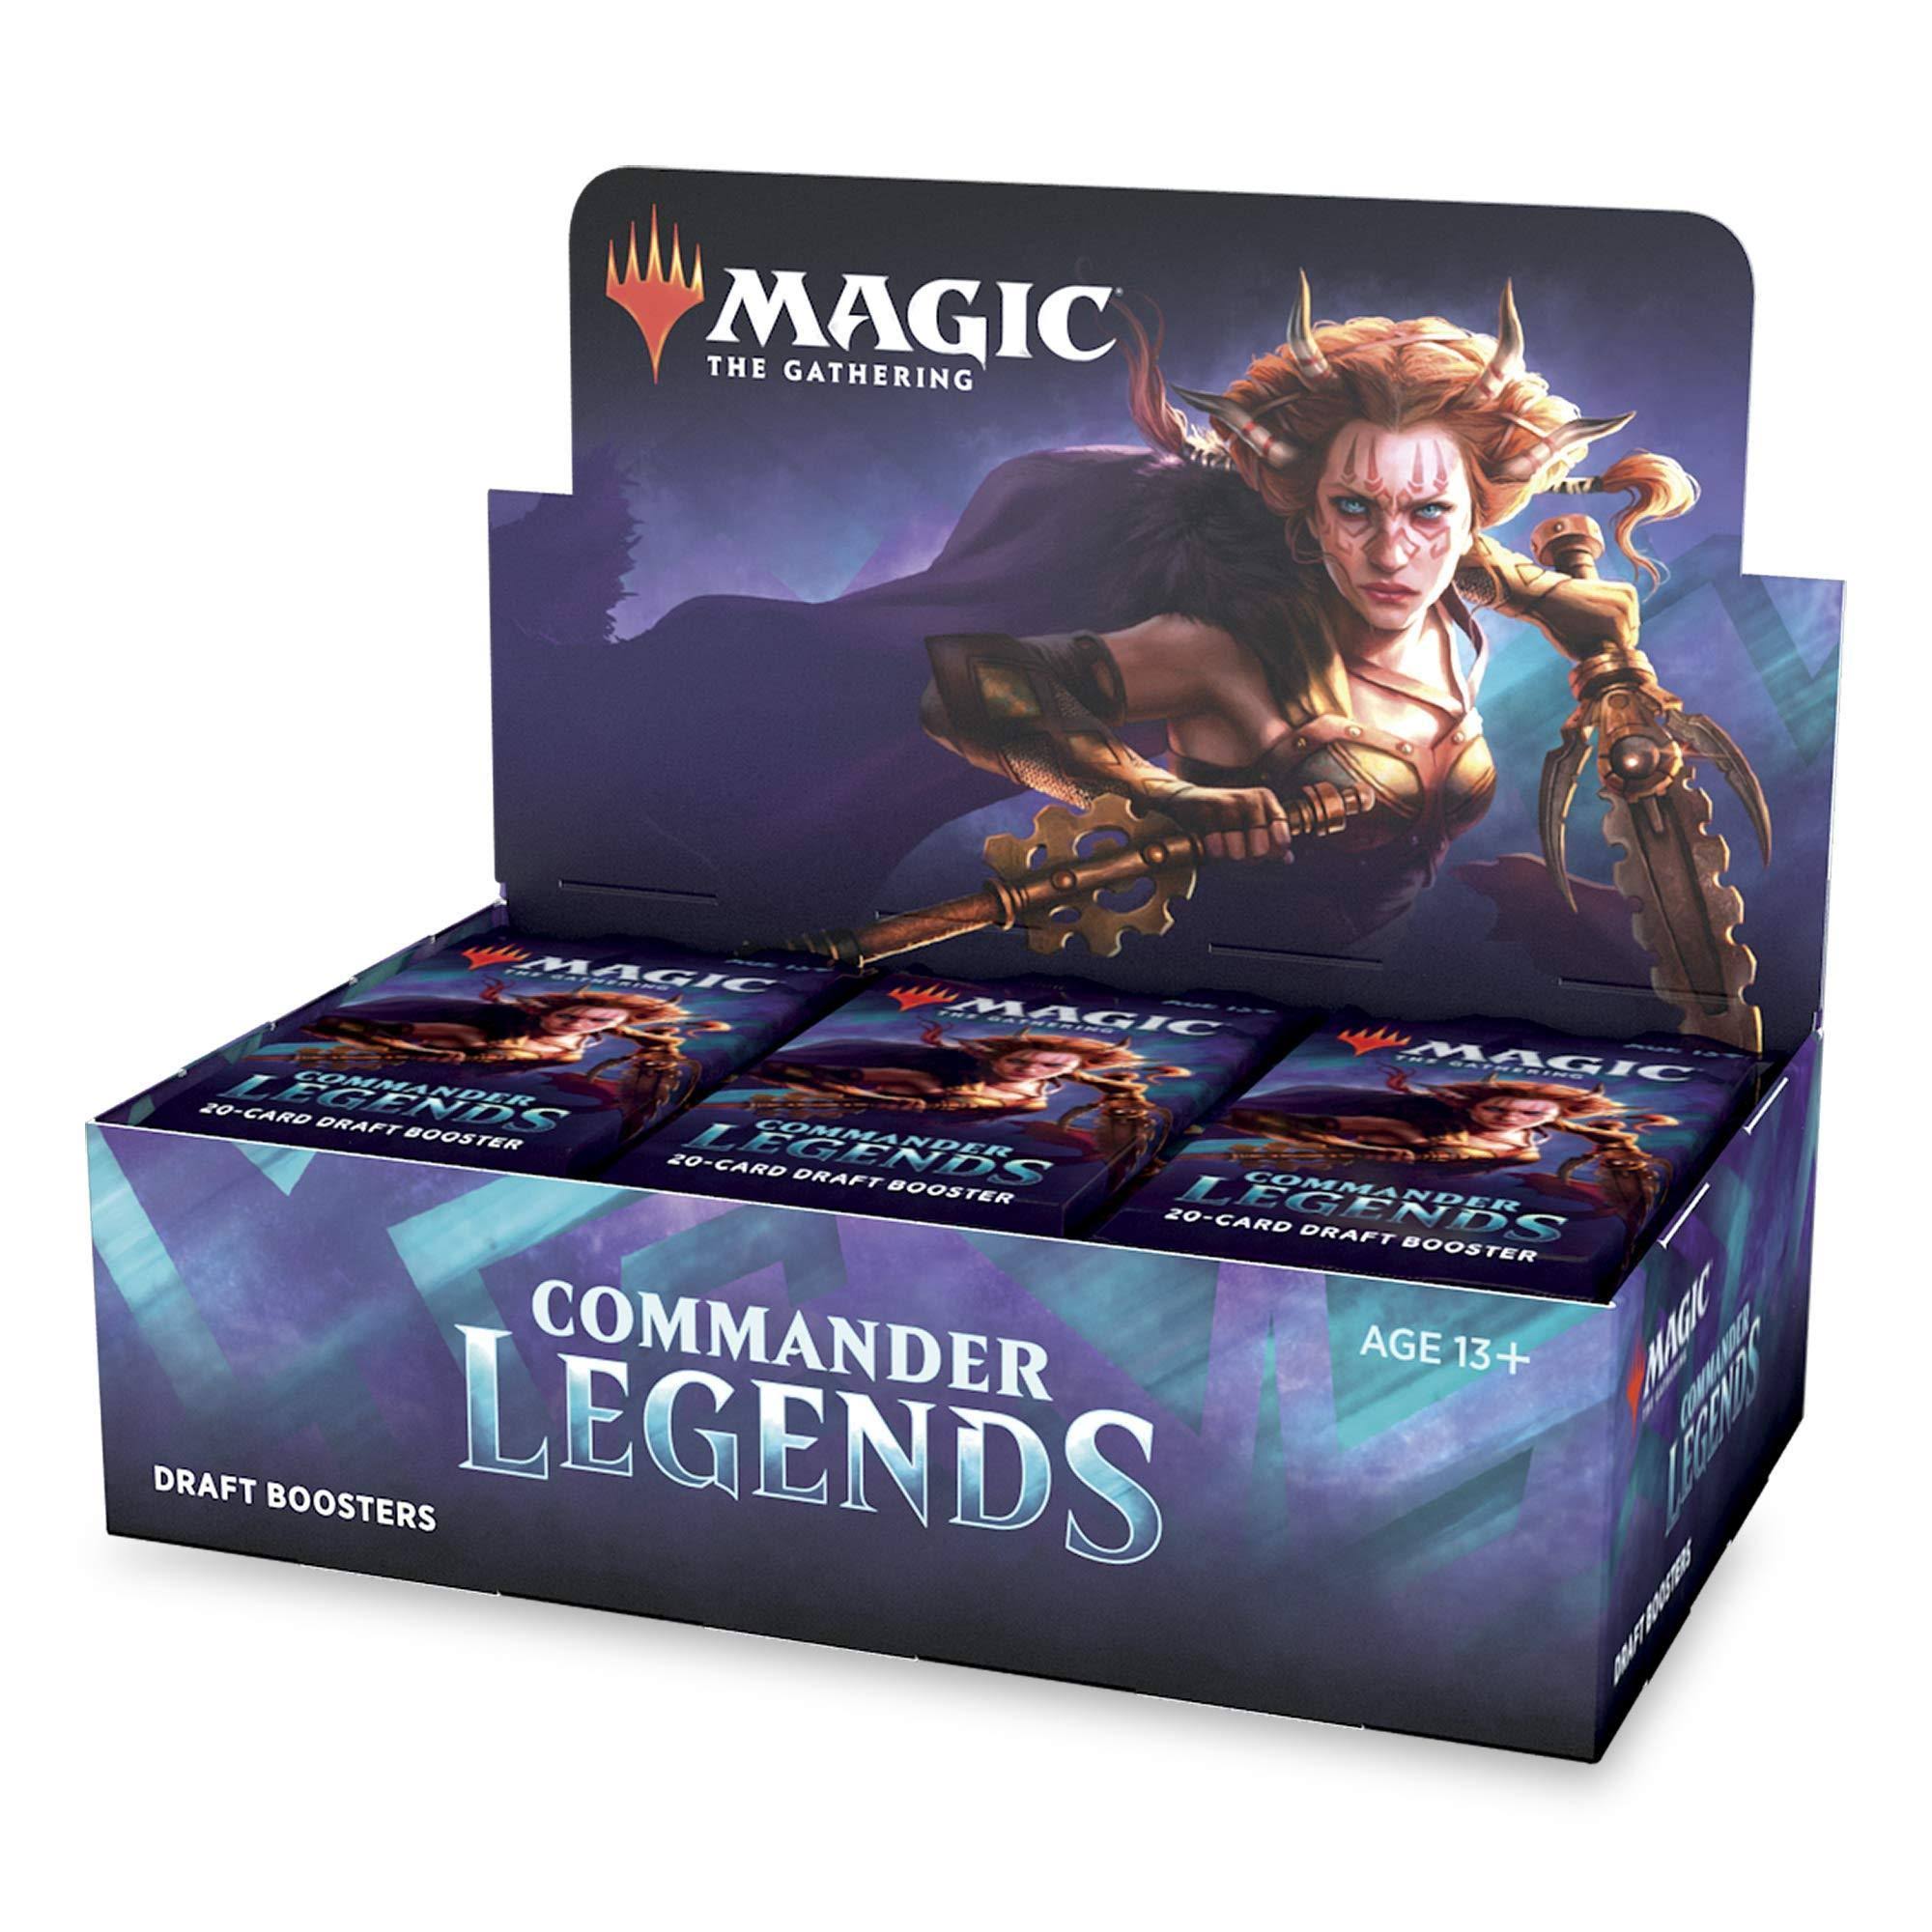 Magic The Gathering - Commander Legends Draft Booster Box